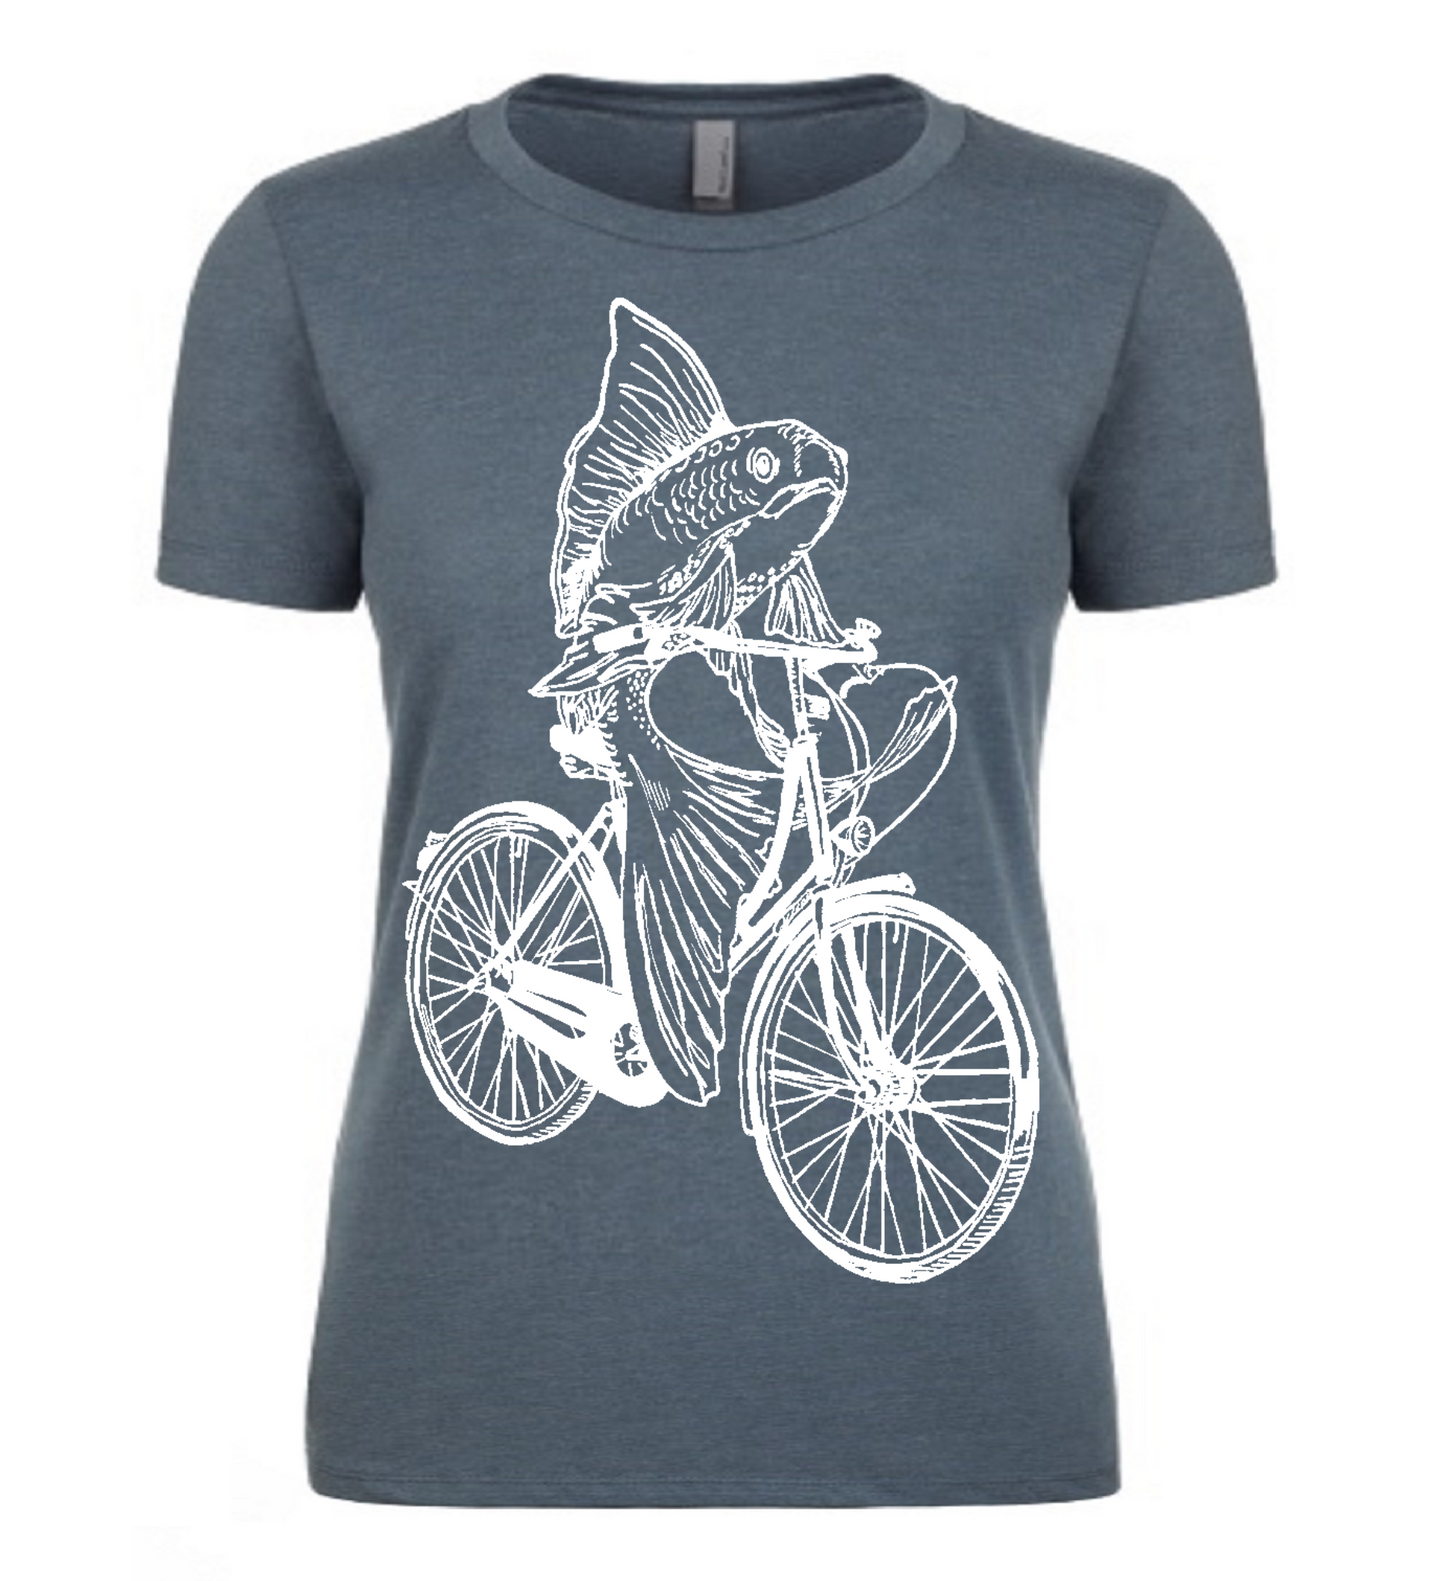 Fish on a Bicycle Ladies T Shirt